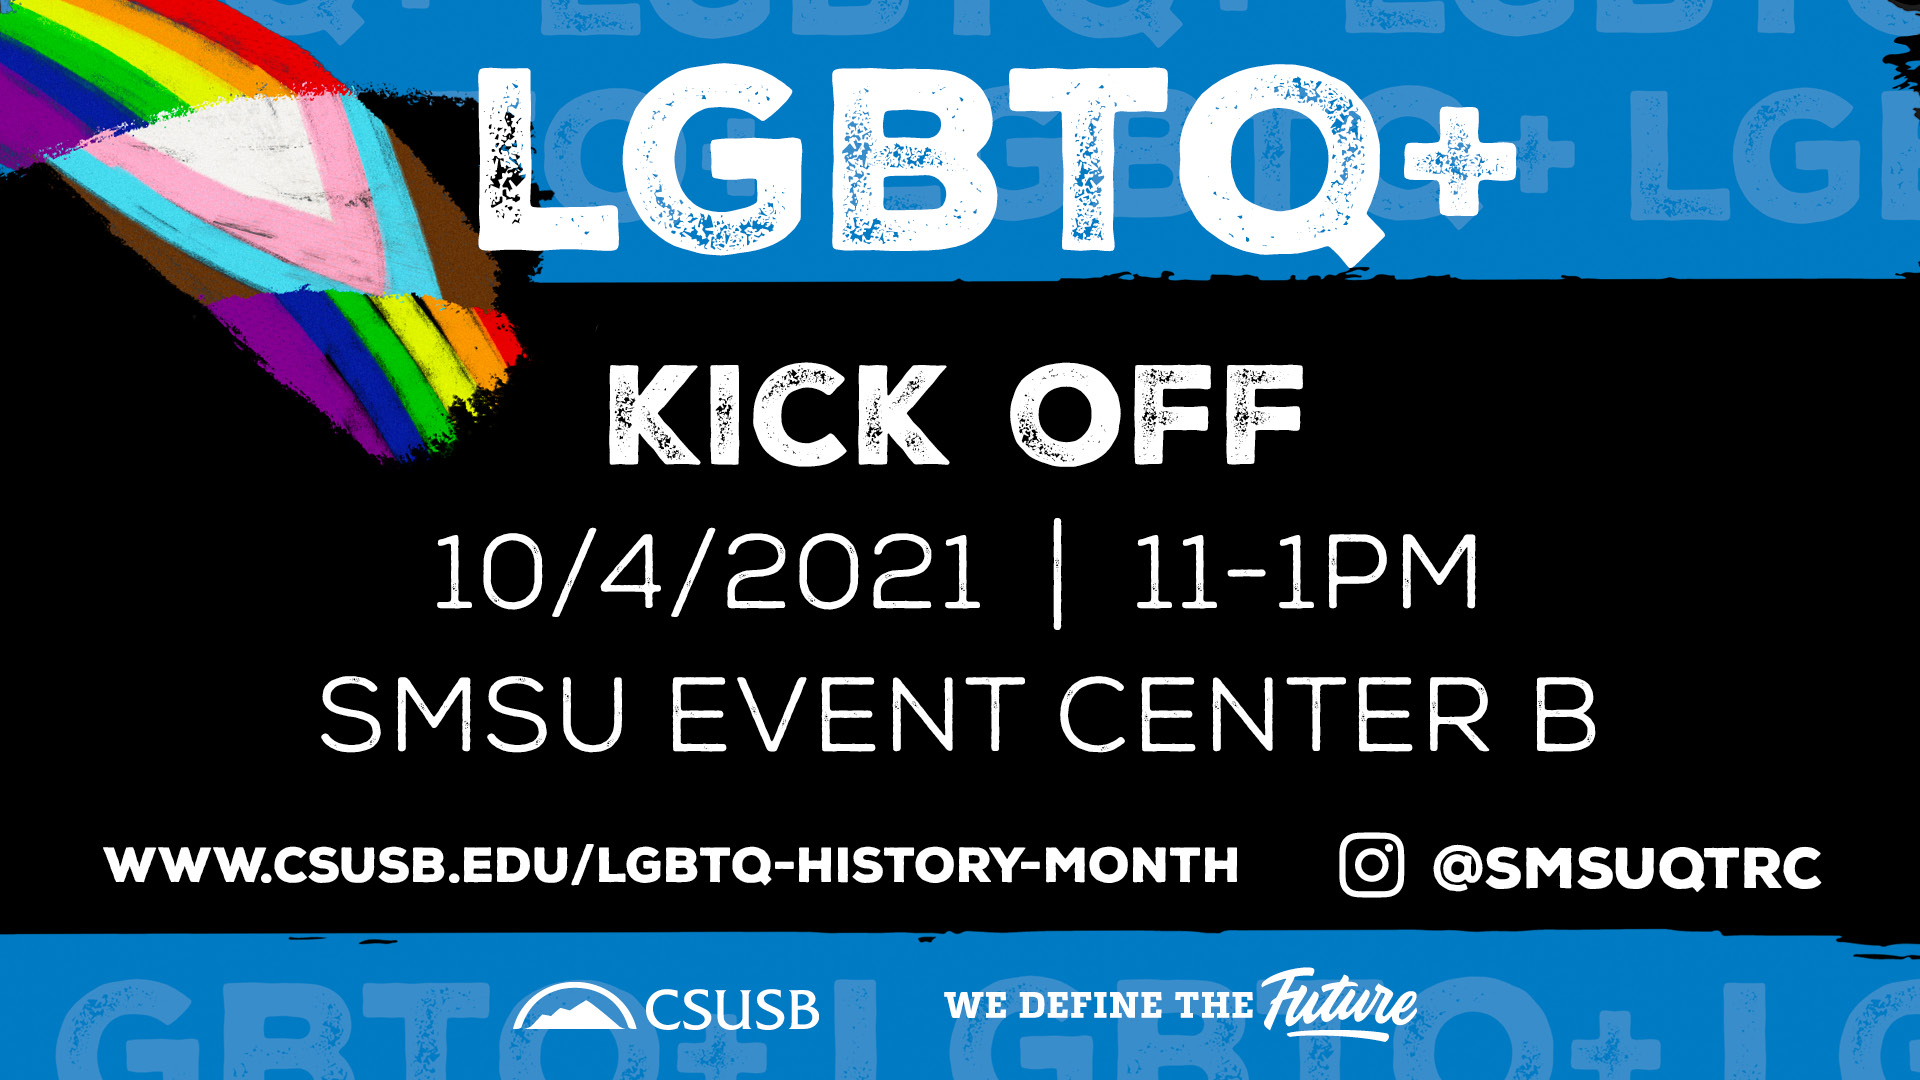 Blue and black flyer, with the following words: "LGBTQ+ Kick Off, 10/4/2021 | 11 to 1pm SMSU Event Center B" "www.csusb.edu/lgbtq-history-month and Instagram handle at SMSUQTRC